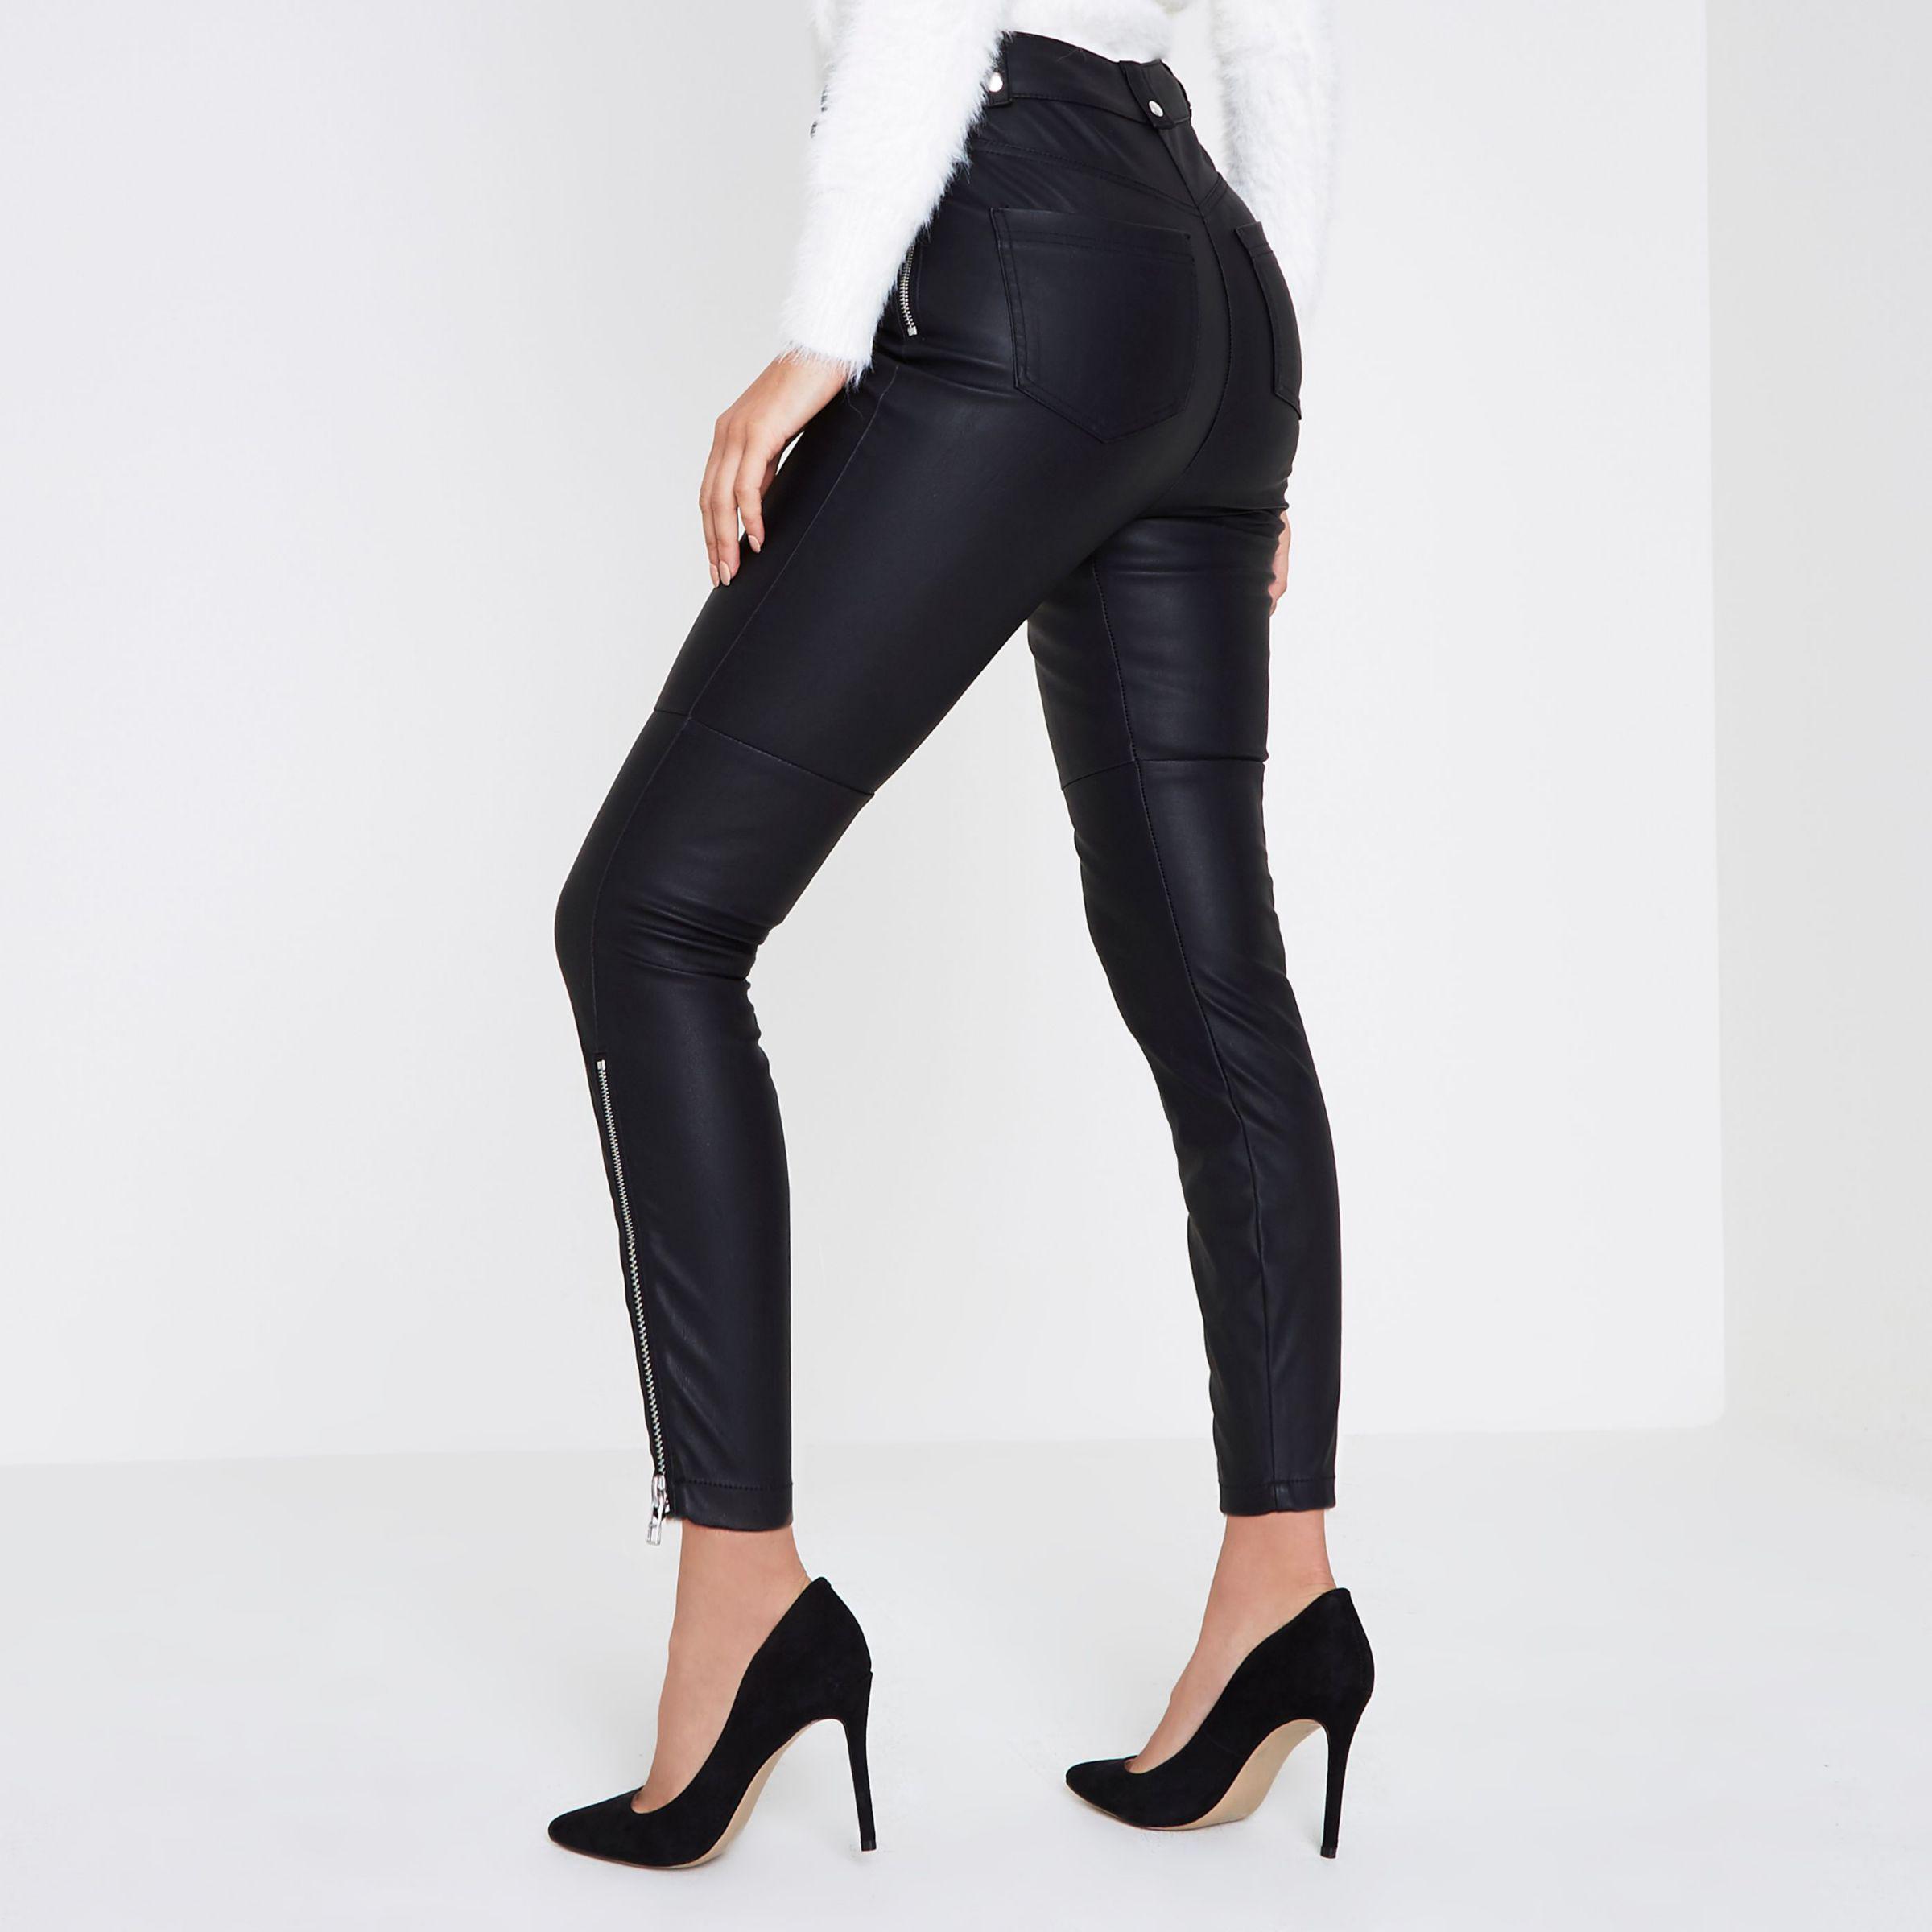 River Island Synthetic Black Lace-up Faux Leather Skinny Trousers - Lyst